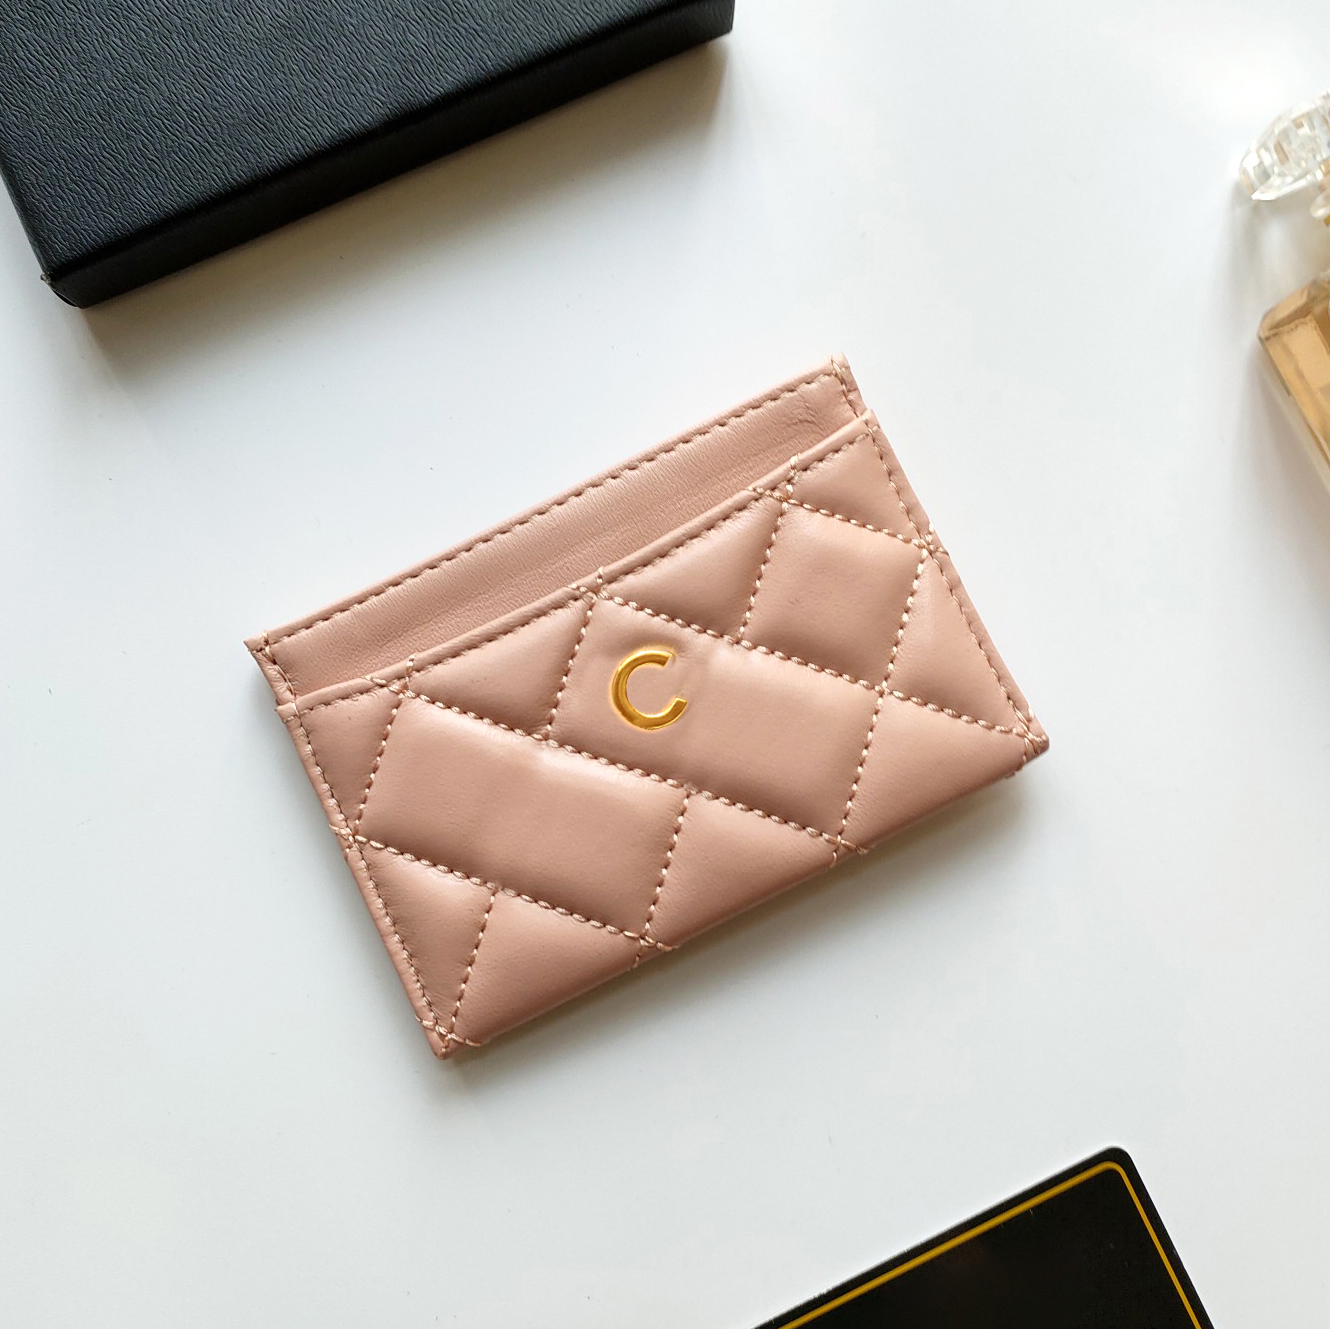 Top Mirror Quality Fashion Fashion Small Wallet Designer Card Holder Coin Purse Pink Young Girl Wallet Slim Leather Carte Portefeuille ID CARTES DE CRÉDIT MINI BOURS